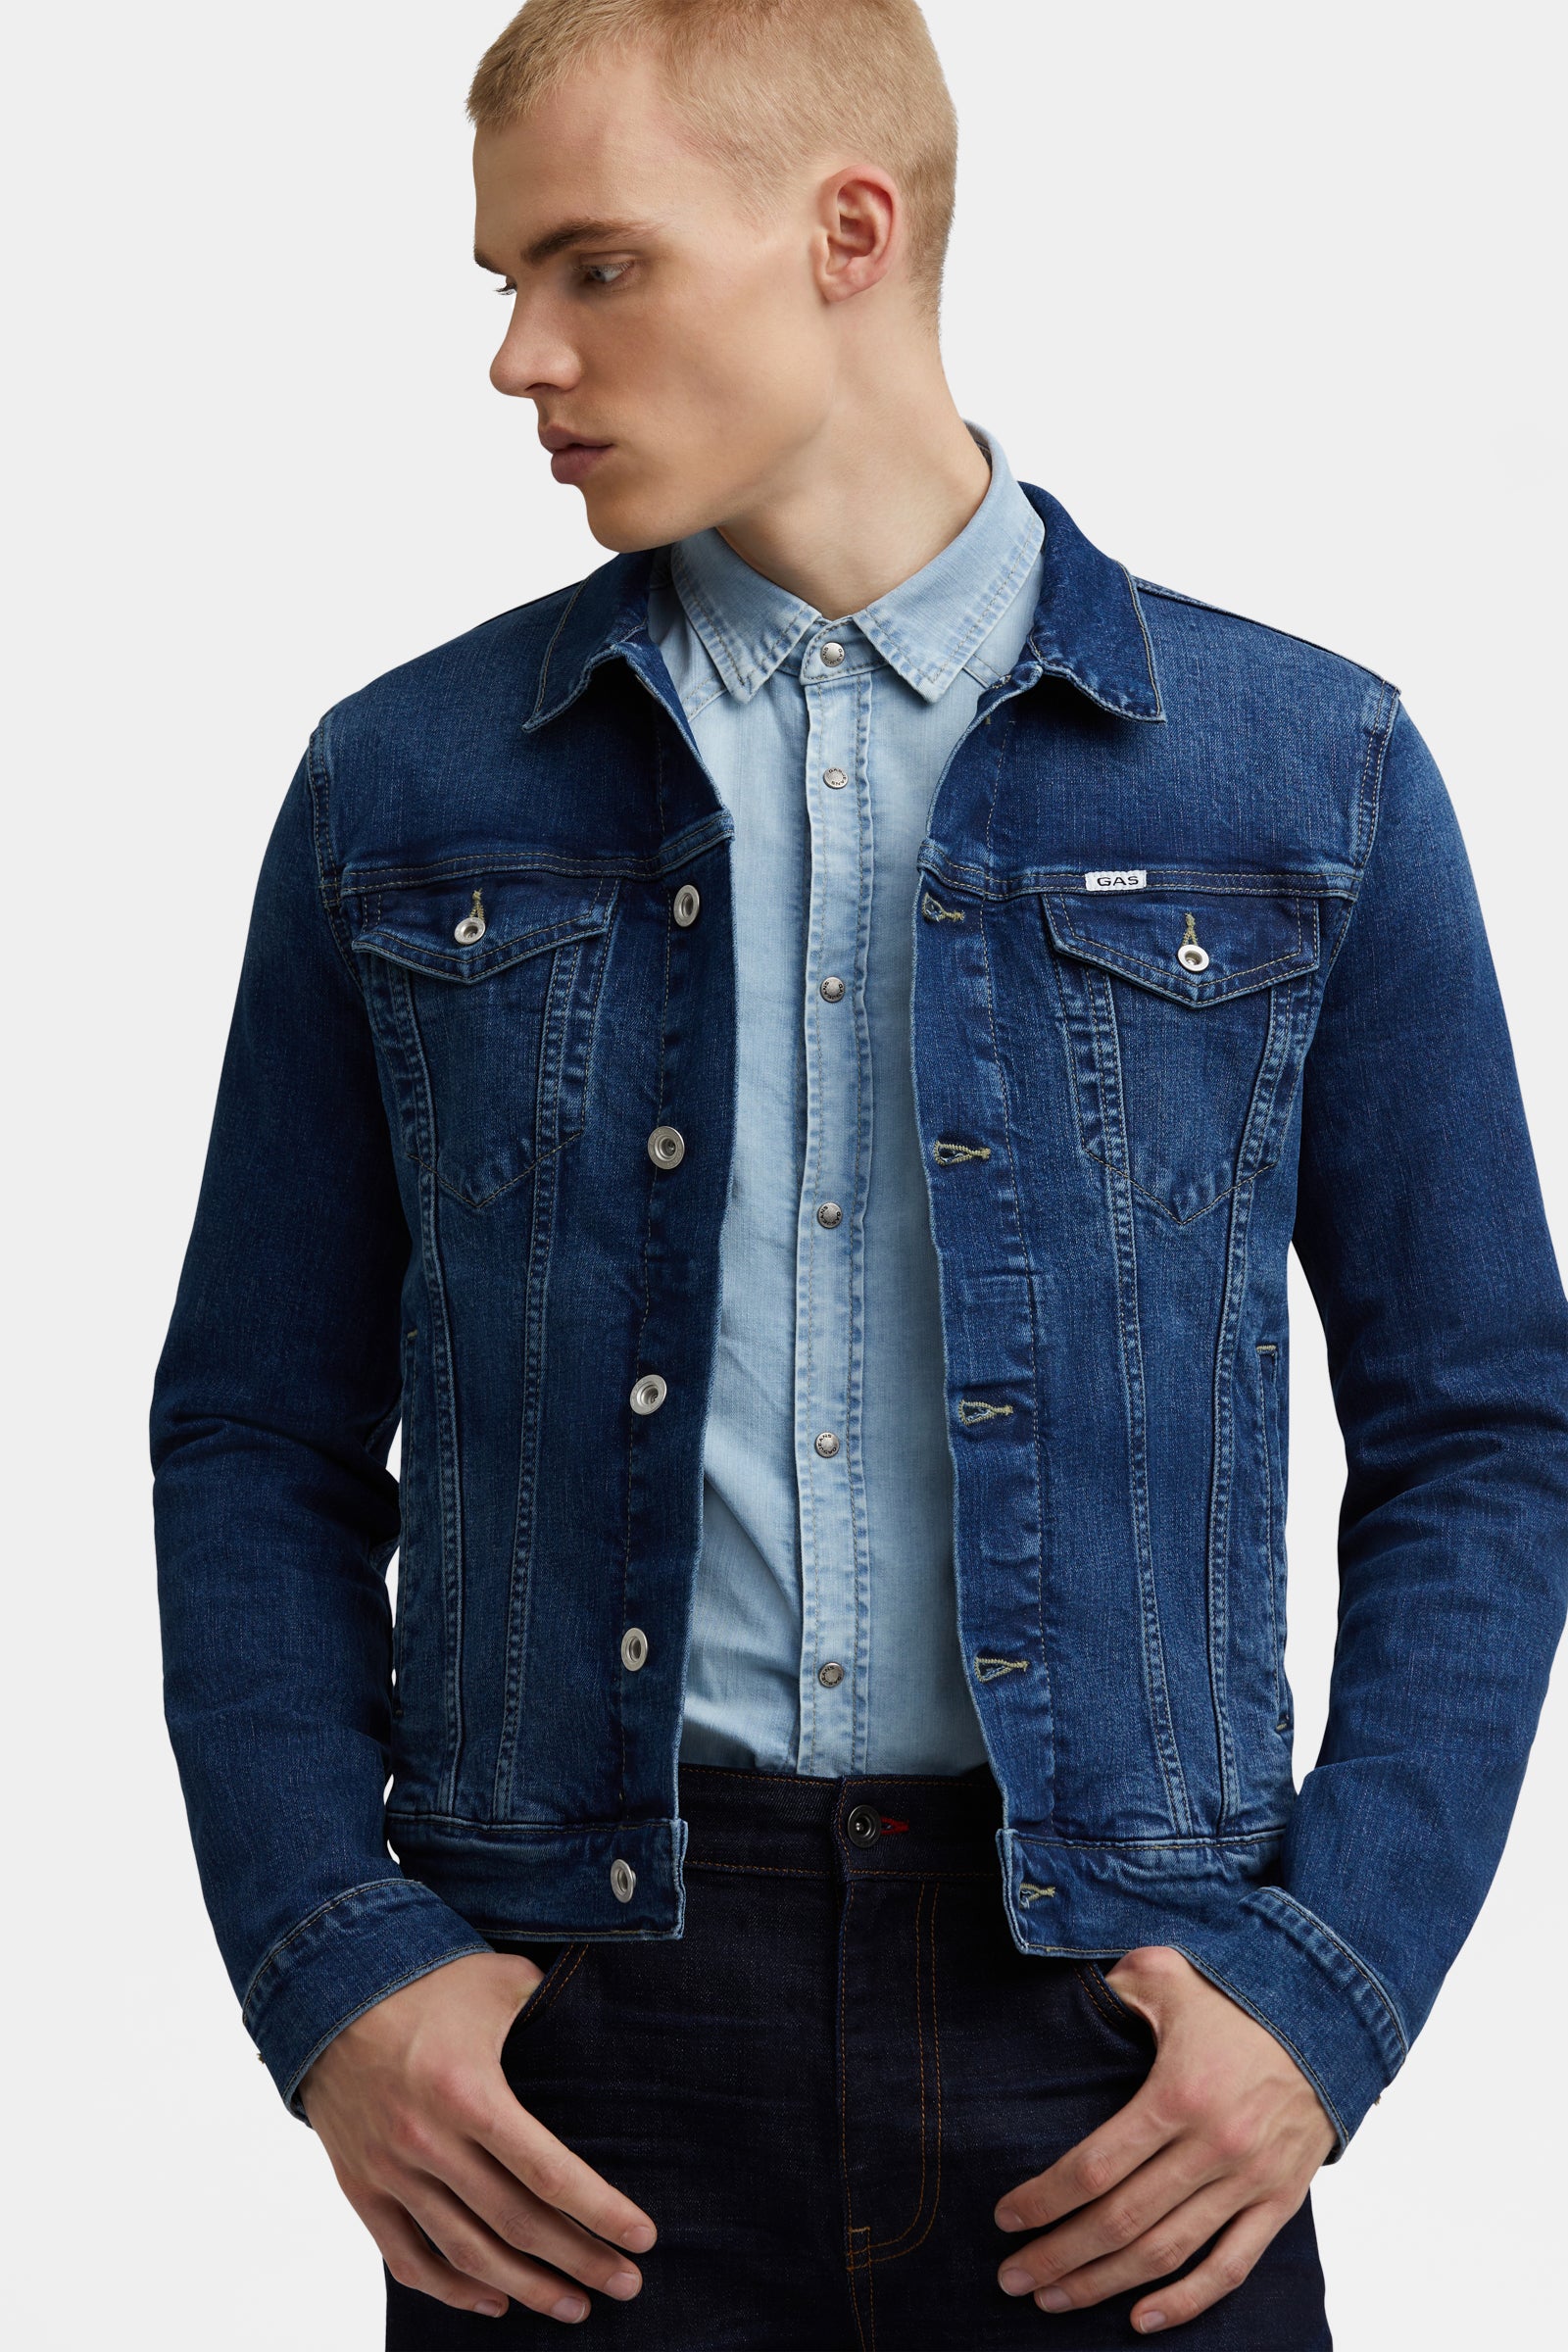 Men's Denim and faux leather jackets | Clothing - Gas Jeans – GAS 